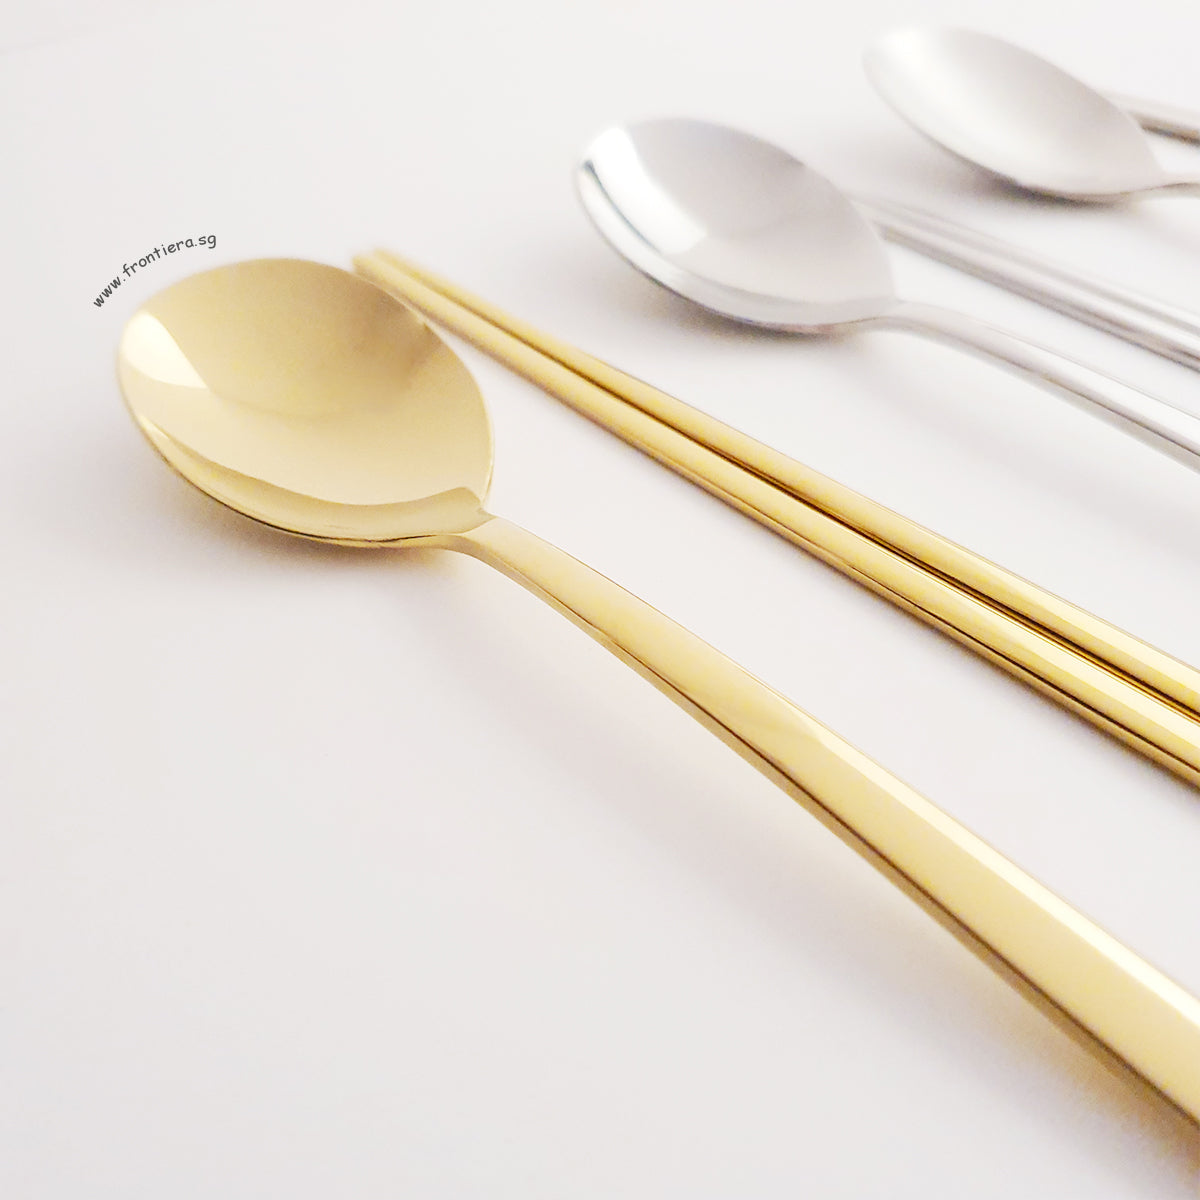 FR4 Classic Gold Spoon & Chopstick Set of 4 + Custome Engraving (Optional)